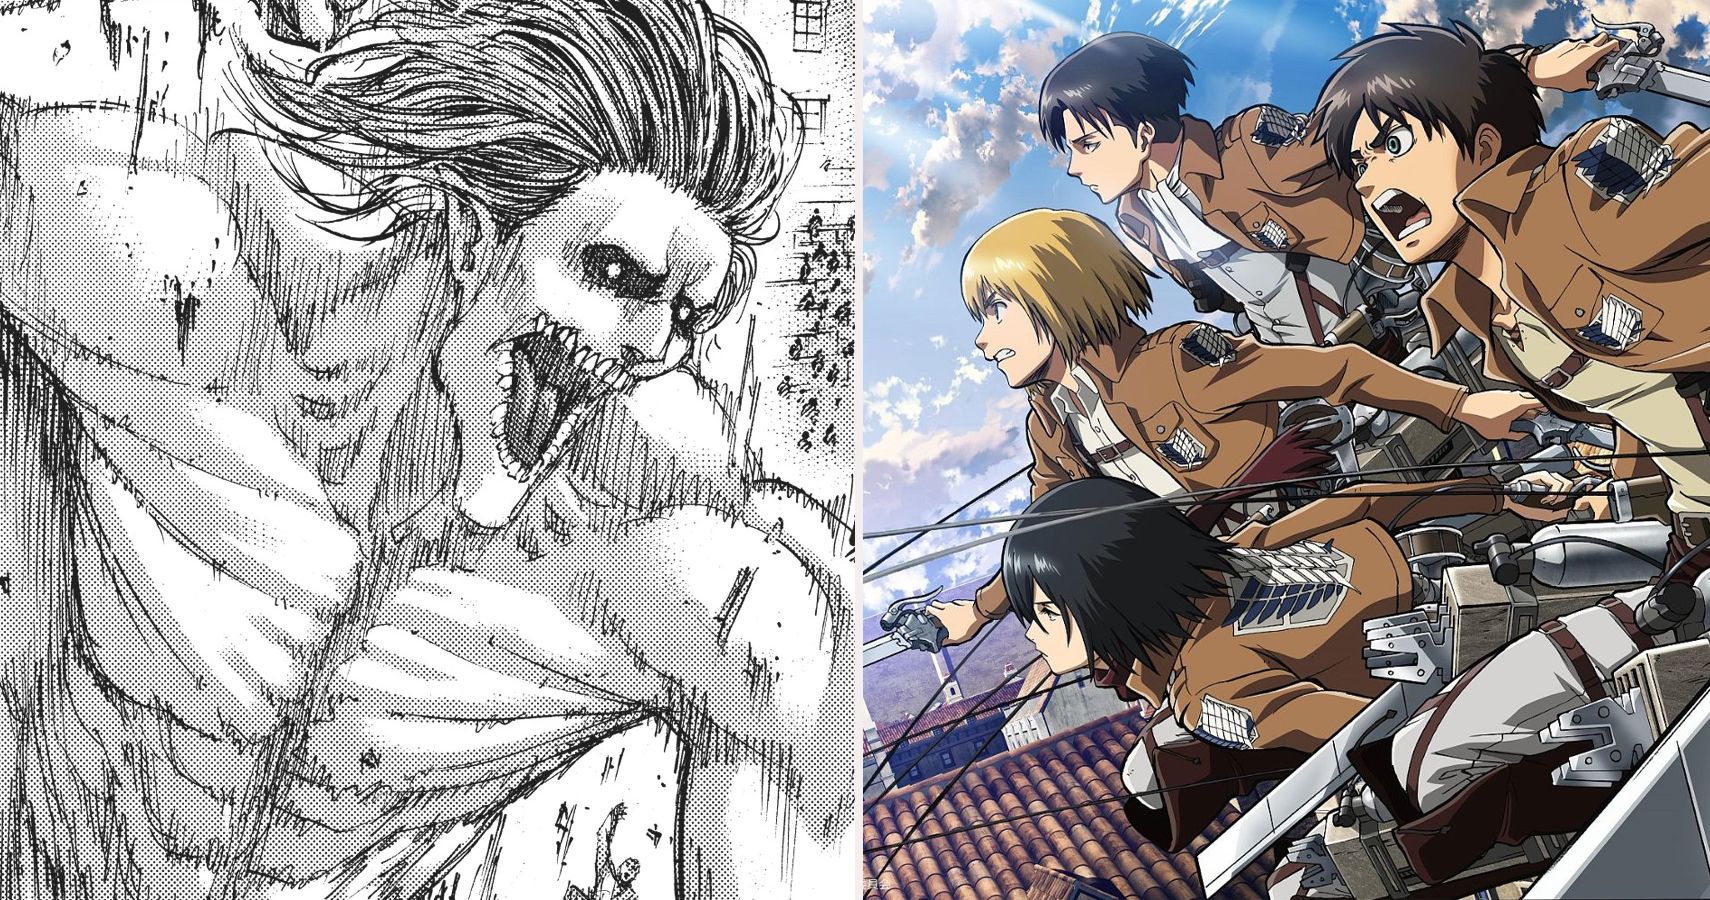 Attack On Titan: 10 Things From The Manga We Can't Wait To See In The Anime